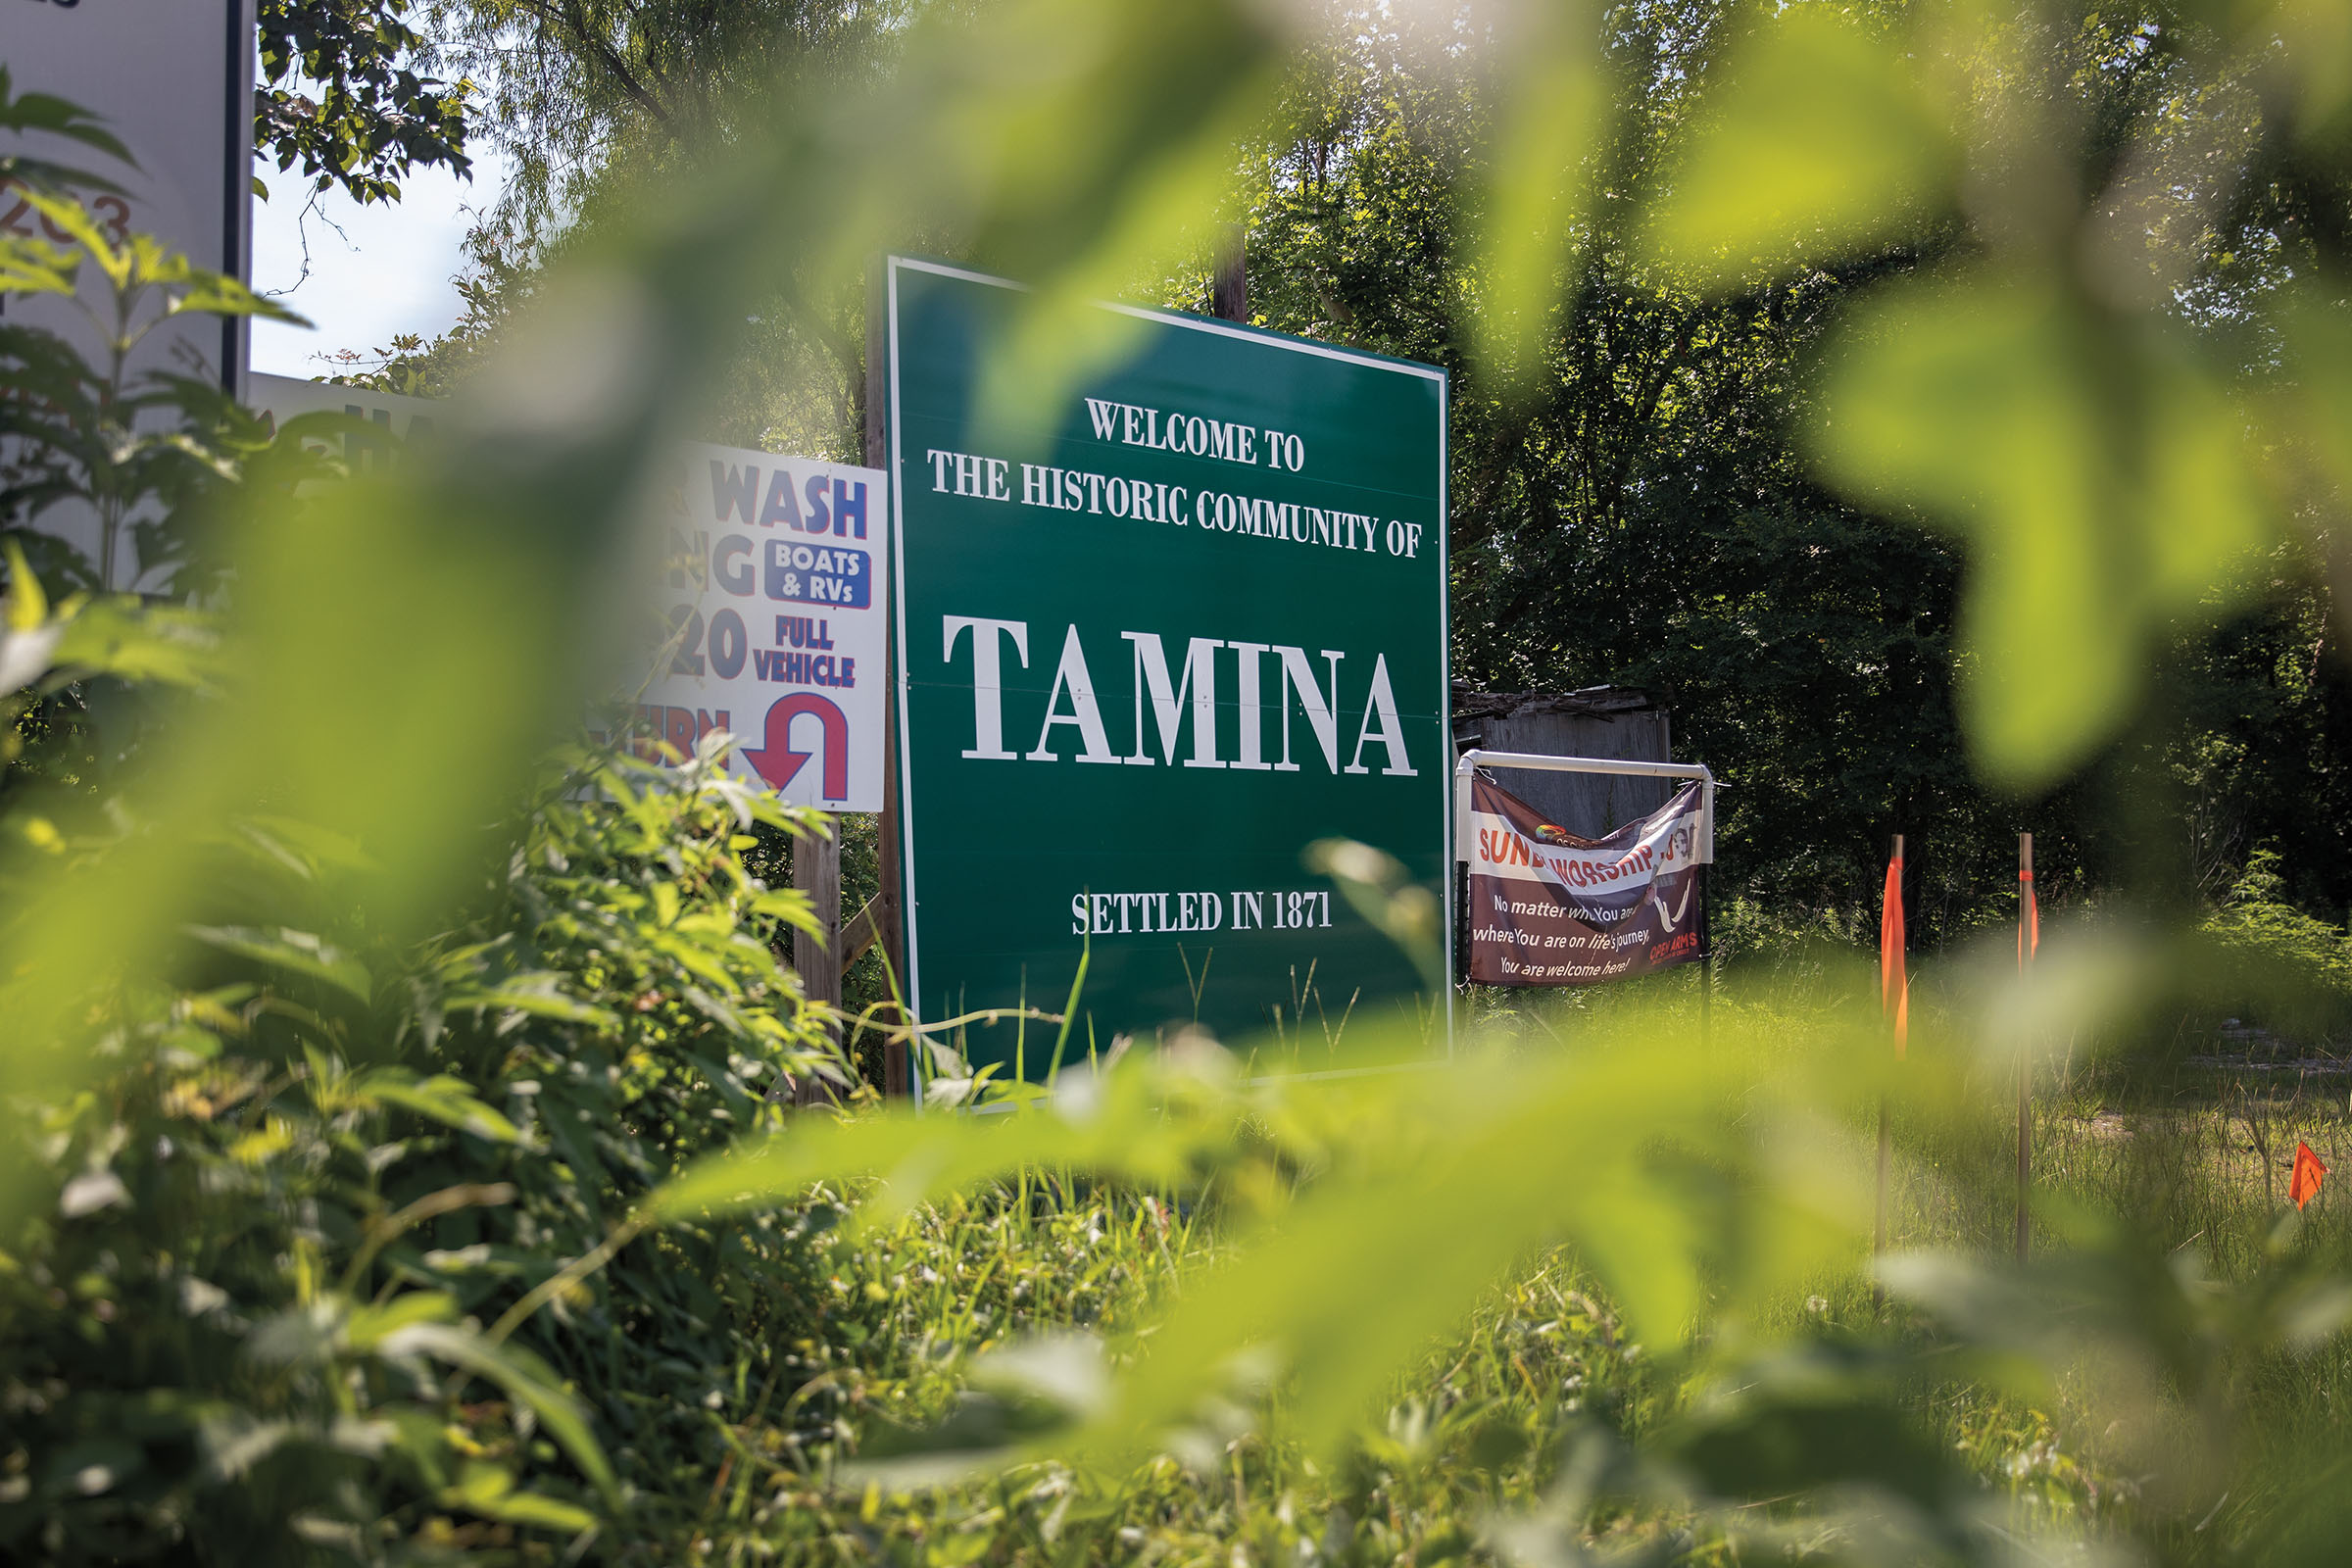 A large green sign reads "Welcome to the historic community of Tamina, settled in 1871"